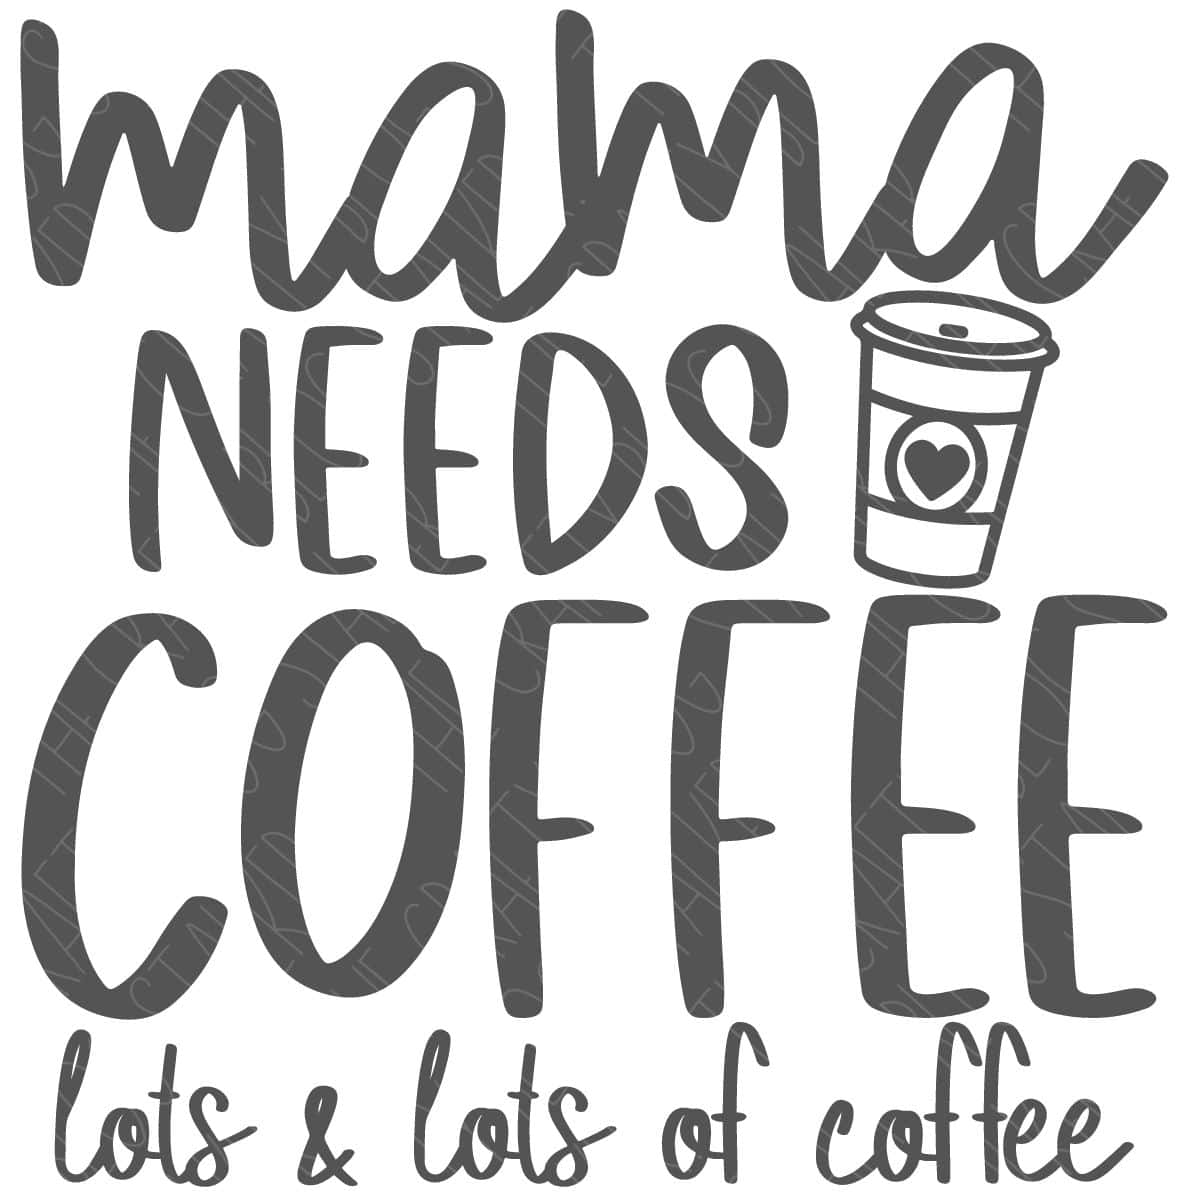 Mama needs coffee (lots and lots of coffee) SVG and PNG bundle